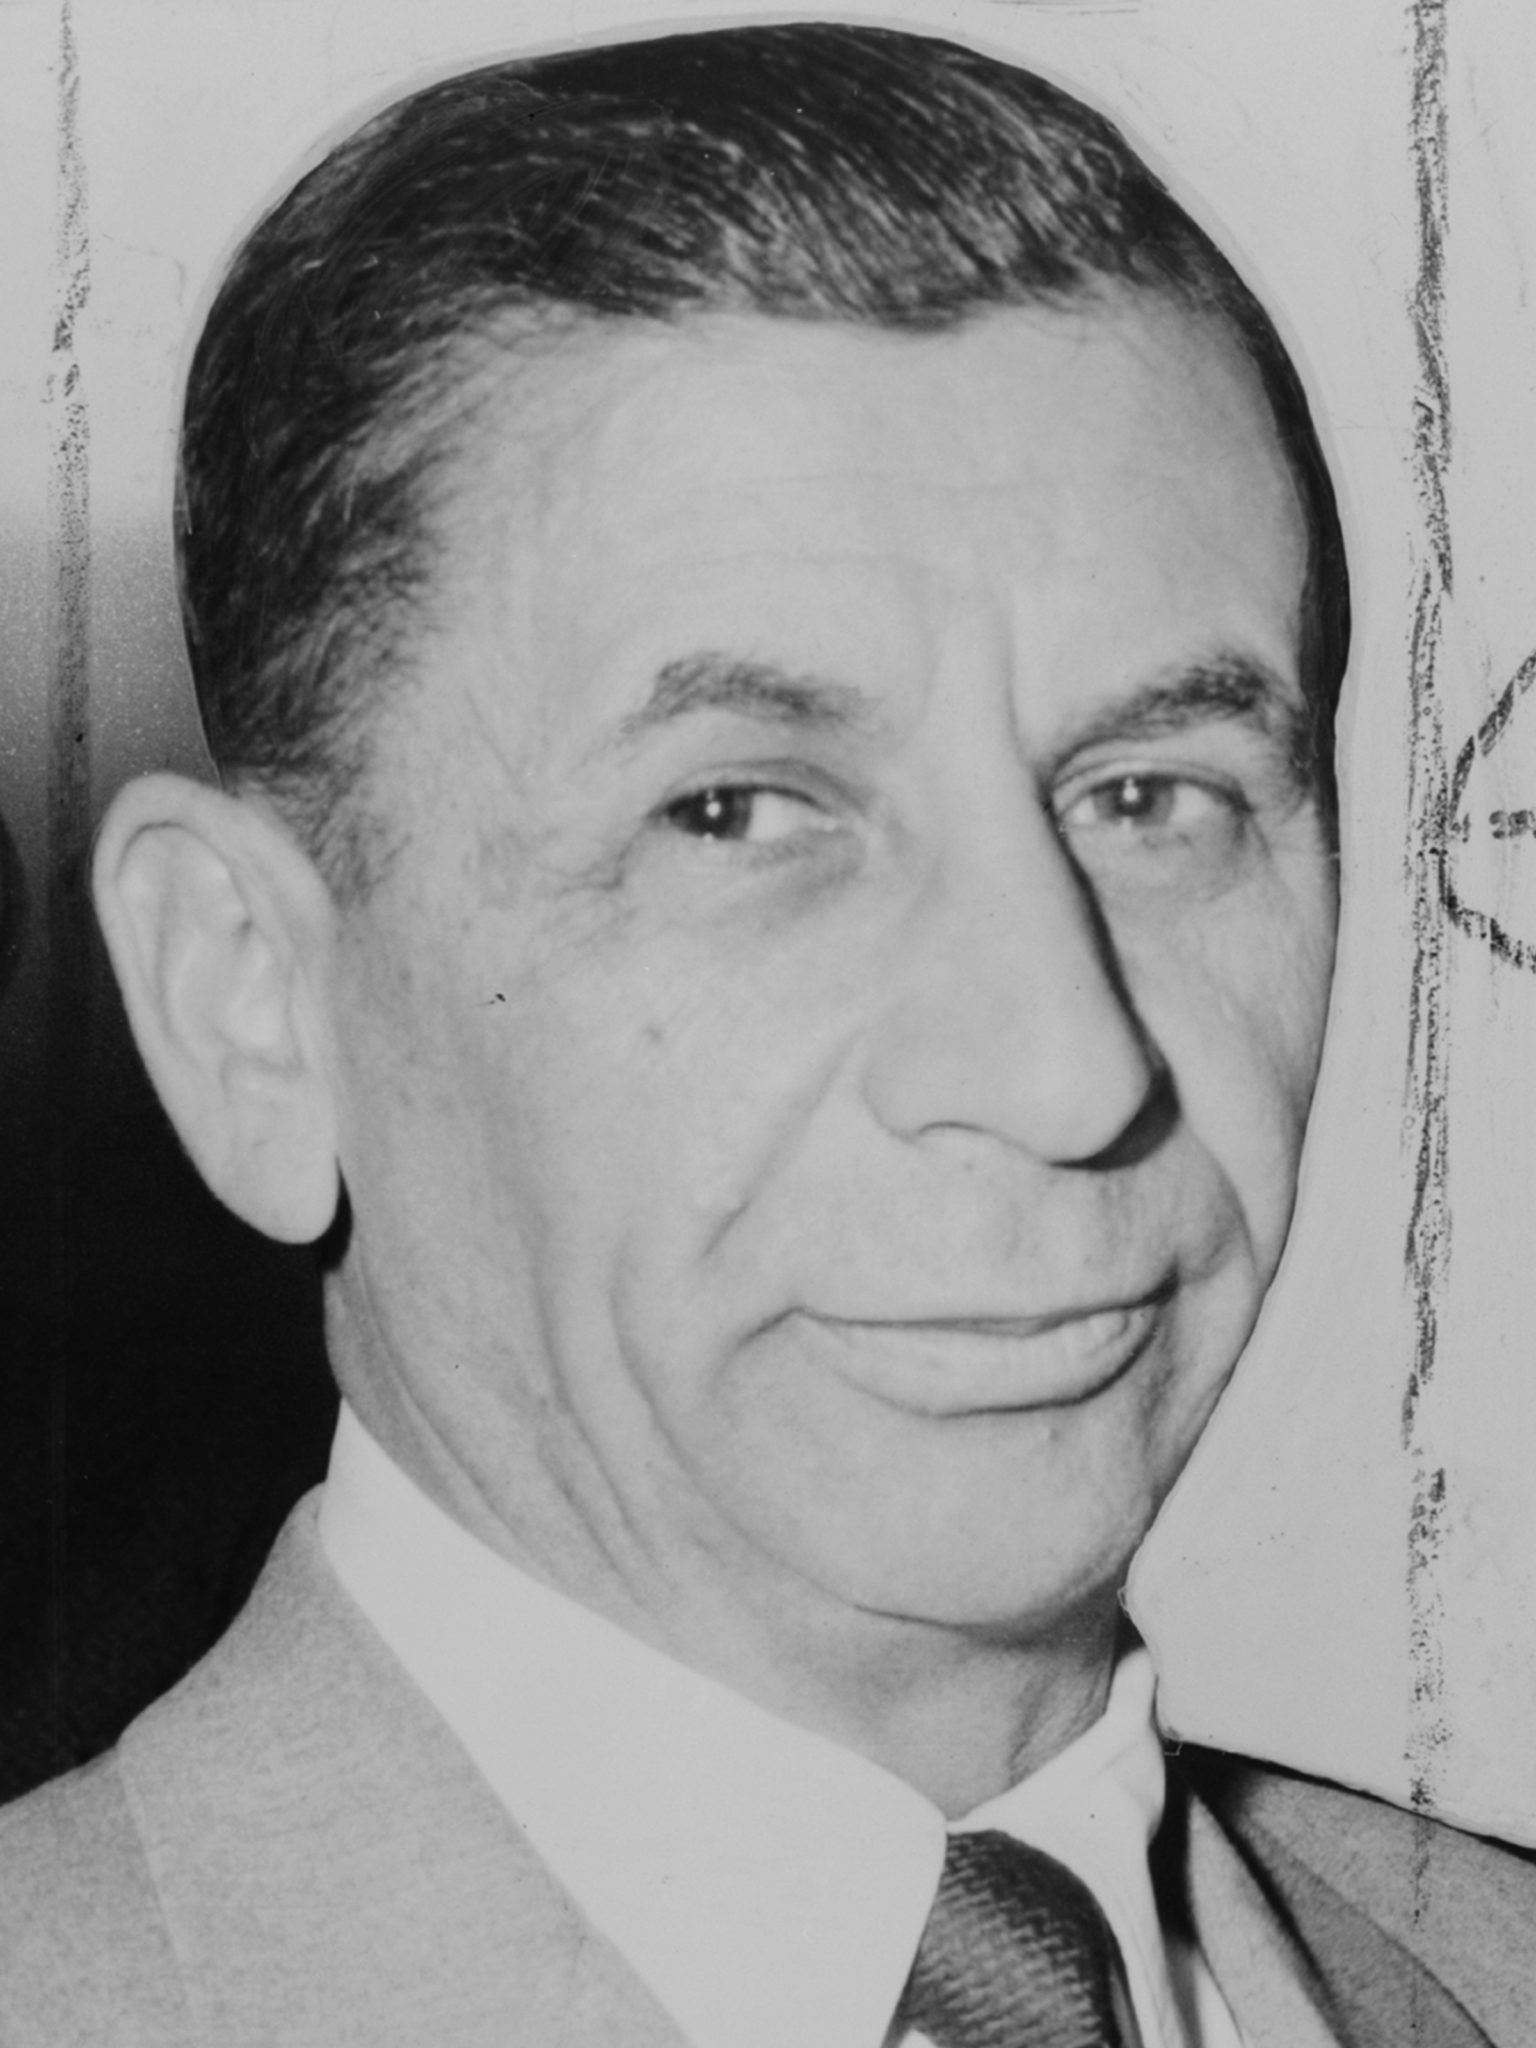 The good and evil of Meyer Lansky - The Mob Museum